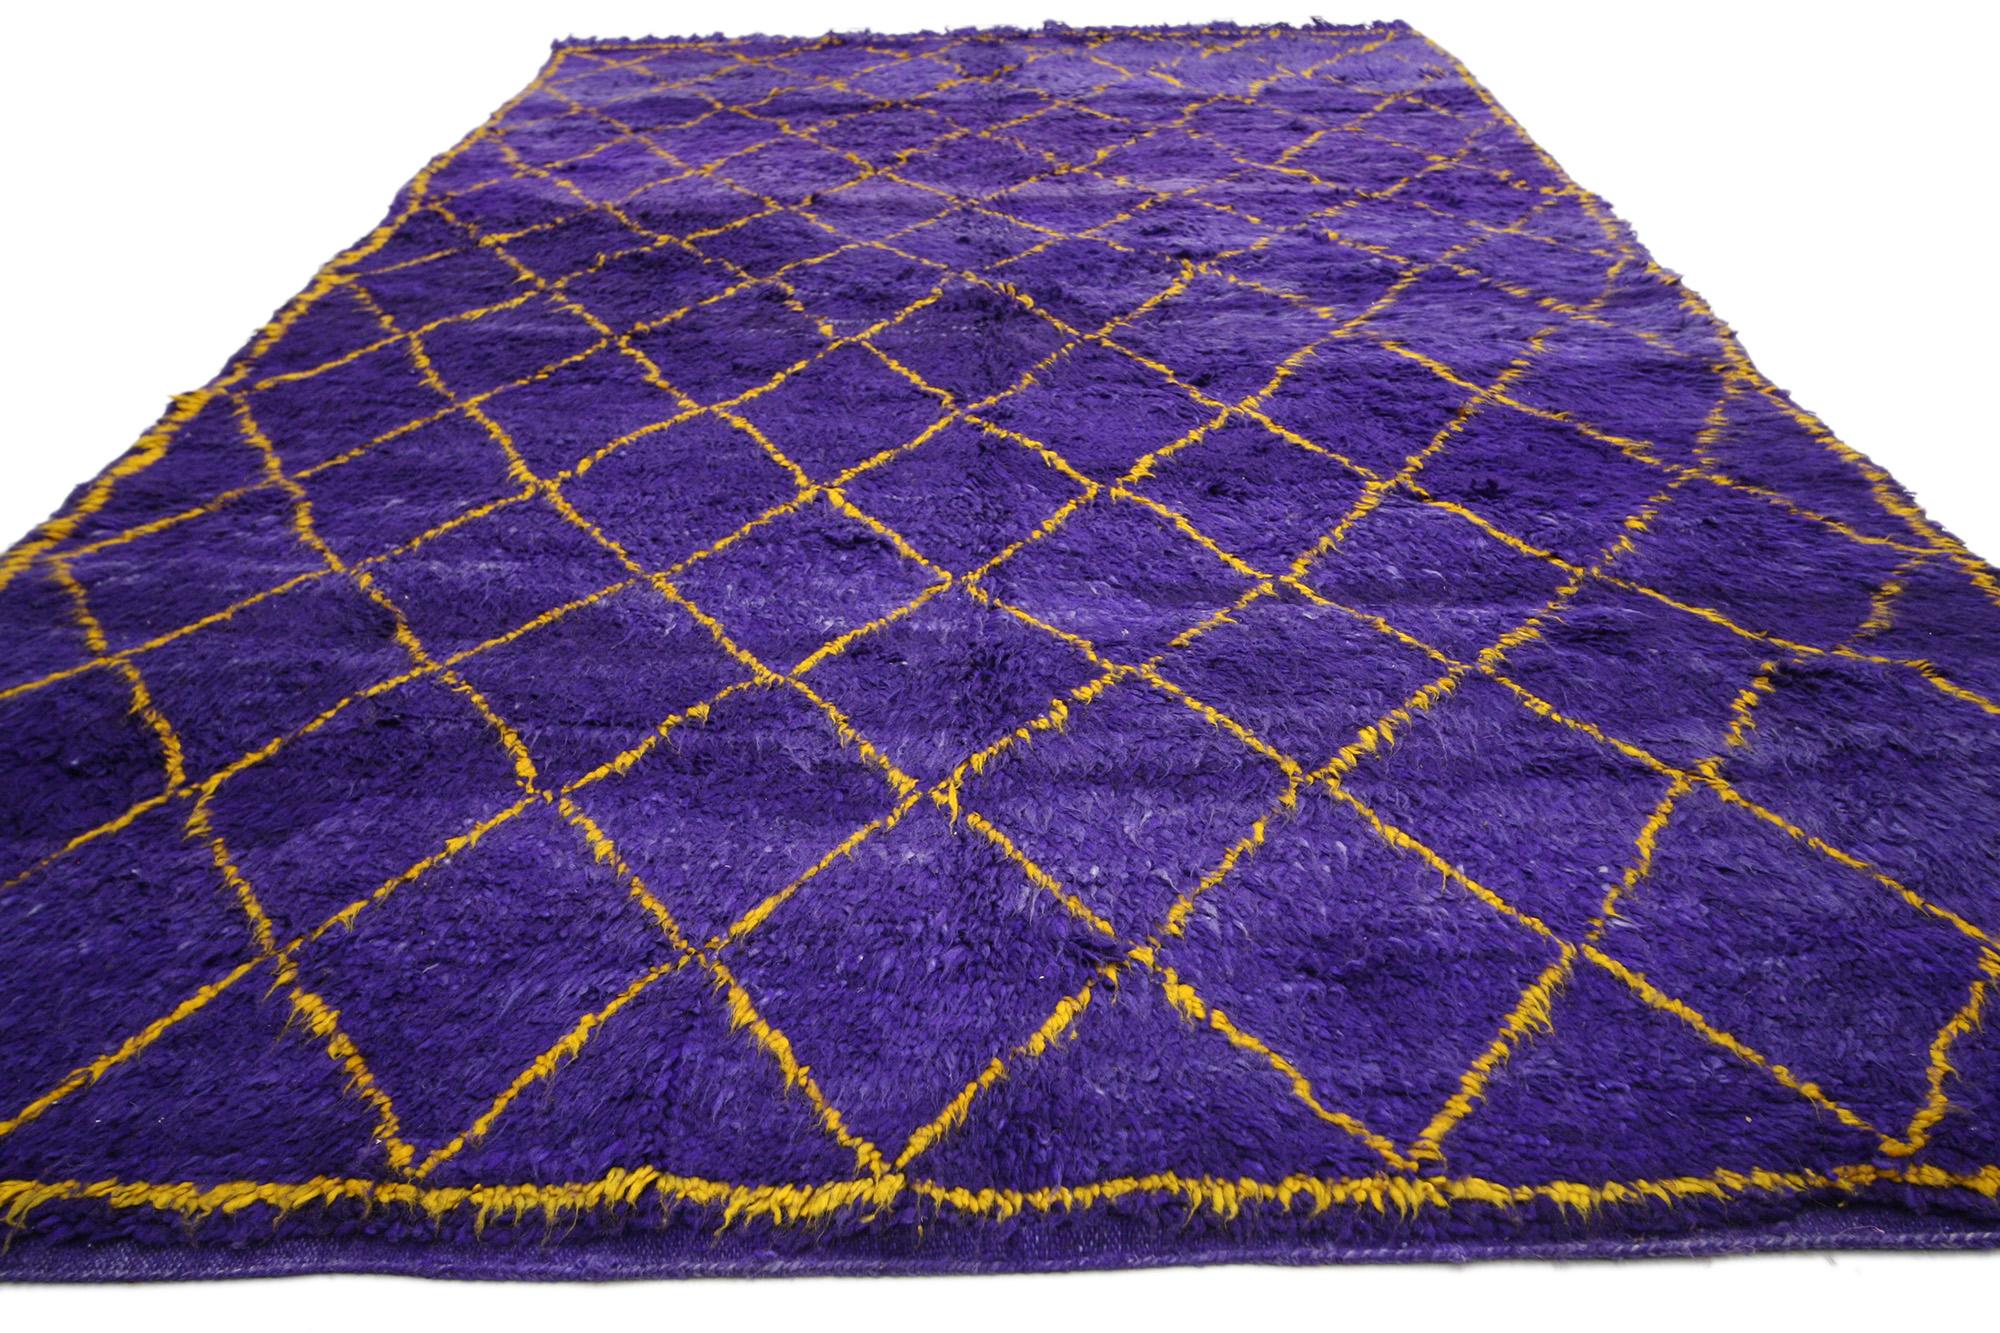 Bohemian Vintage Purple Moroccan Beni Ourain Rug, Midcentury Modern Meets Boho Chic For Sale